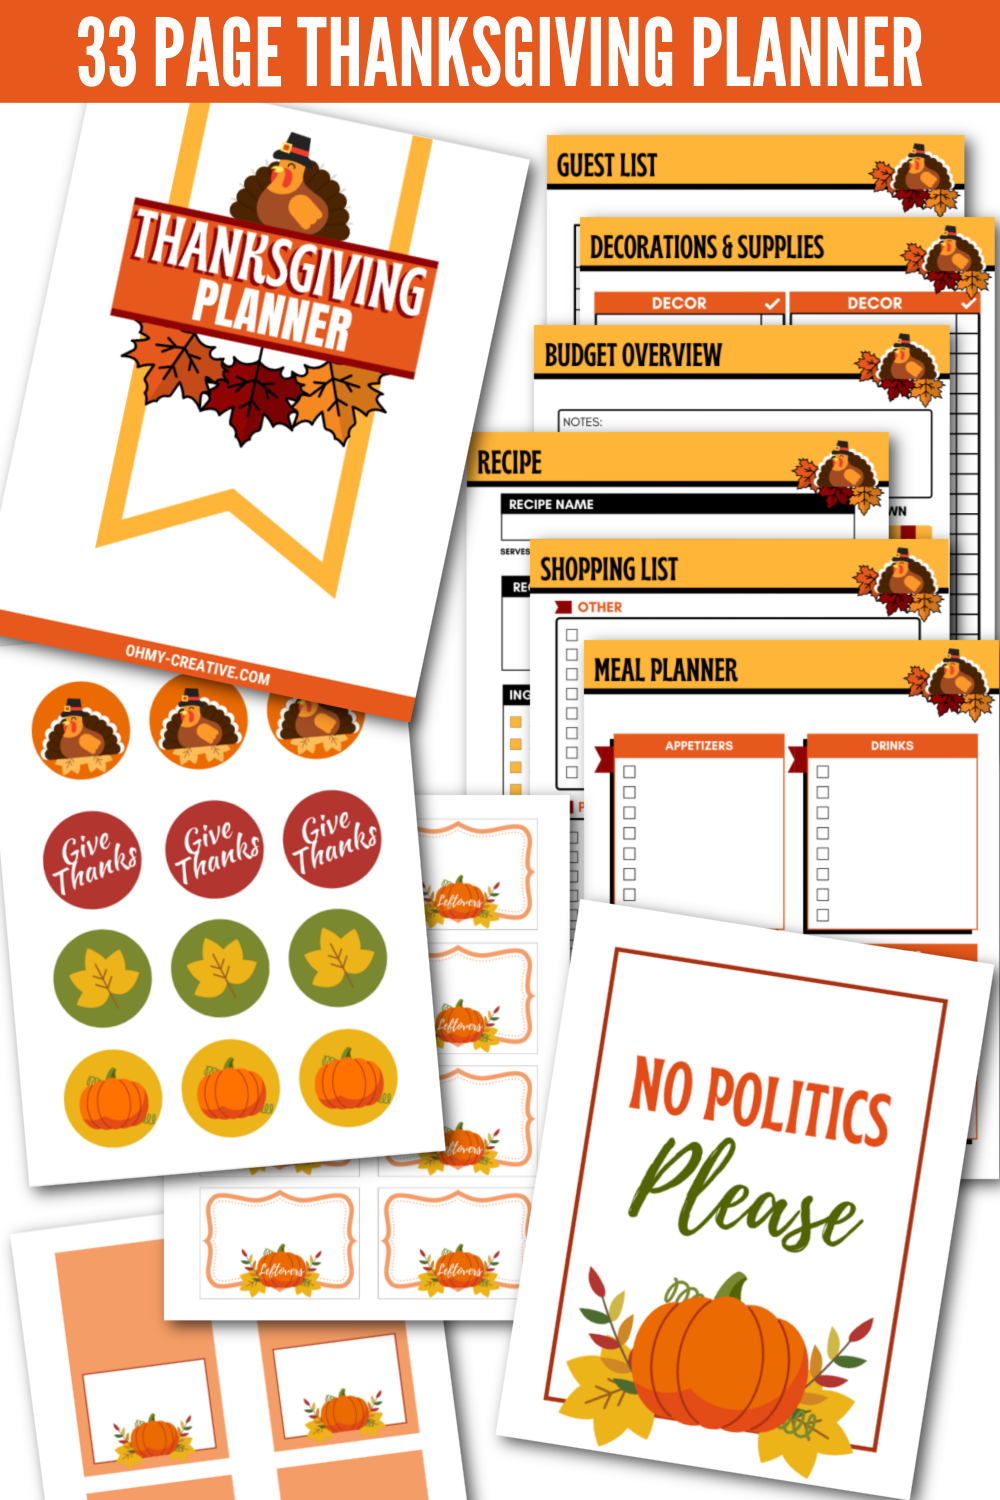 A collage of pages from a 33 page printable Thanksgiving planner.